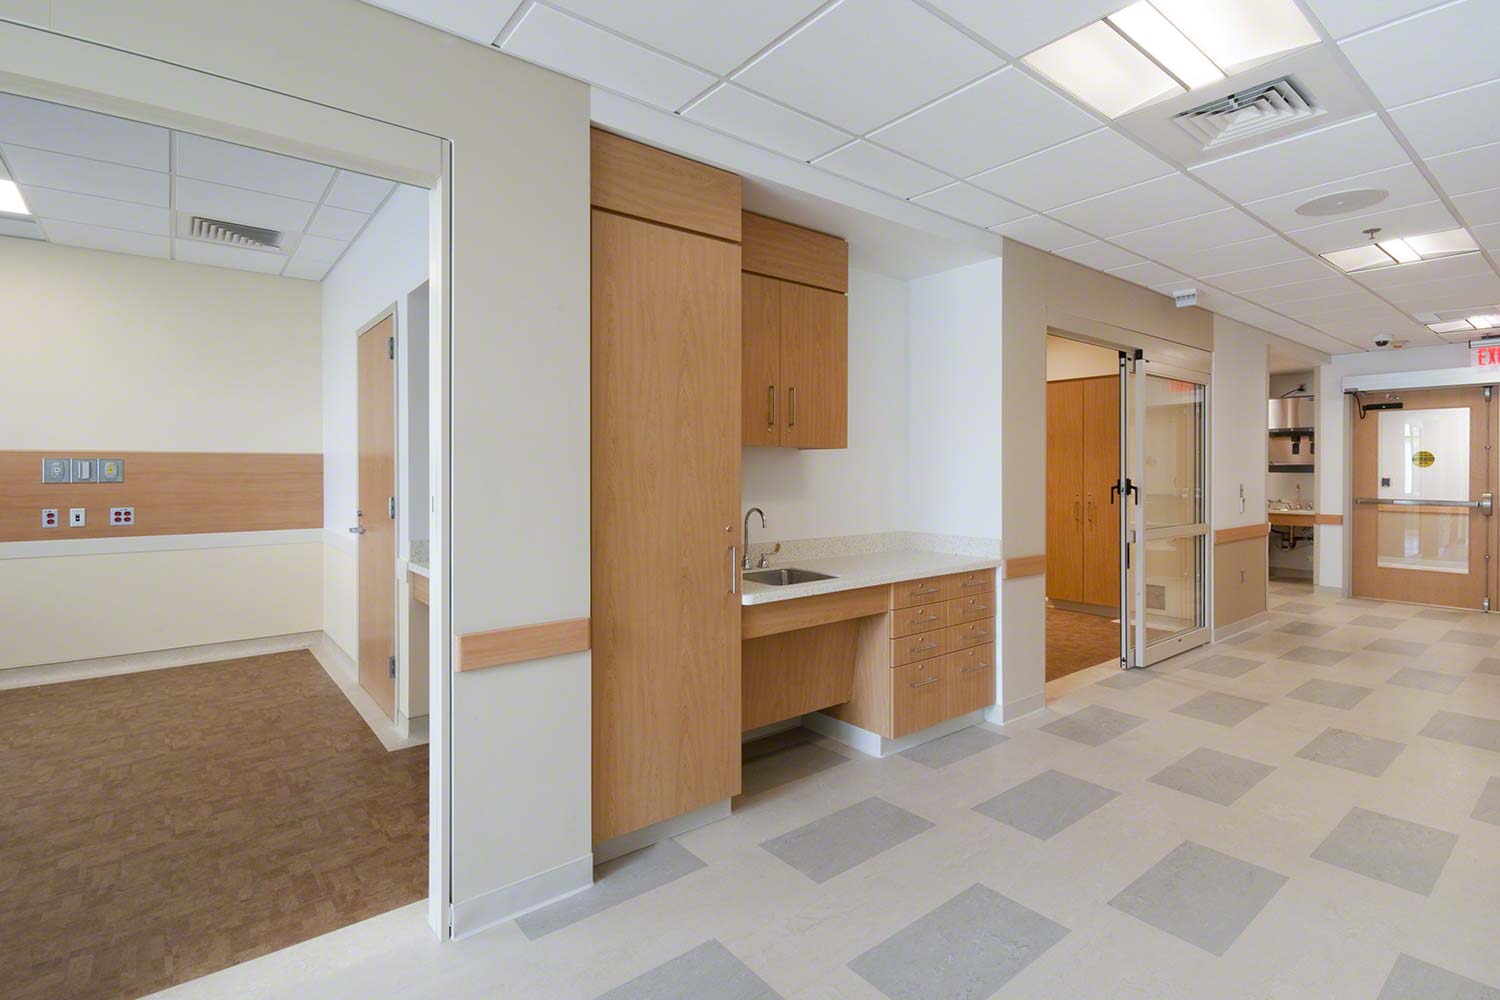 emergency room casework cabinets Commercial Casework and Cabinets